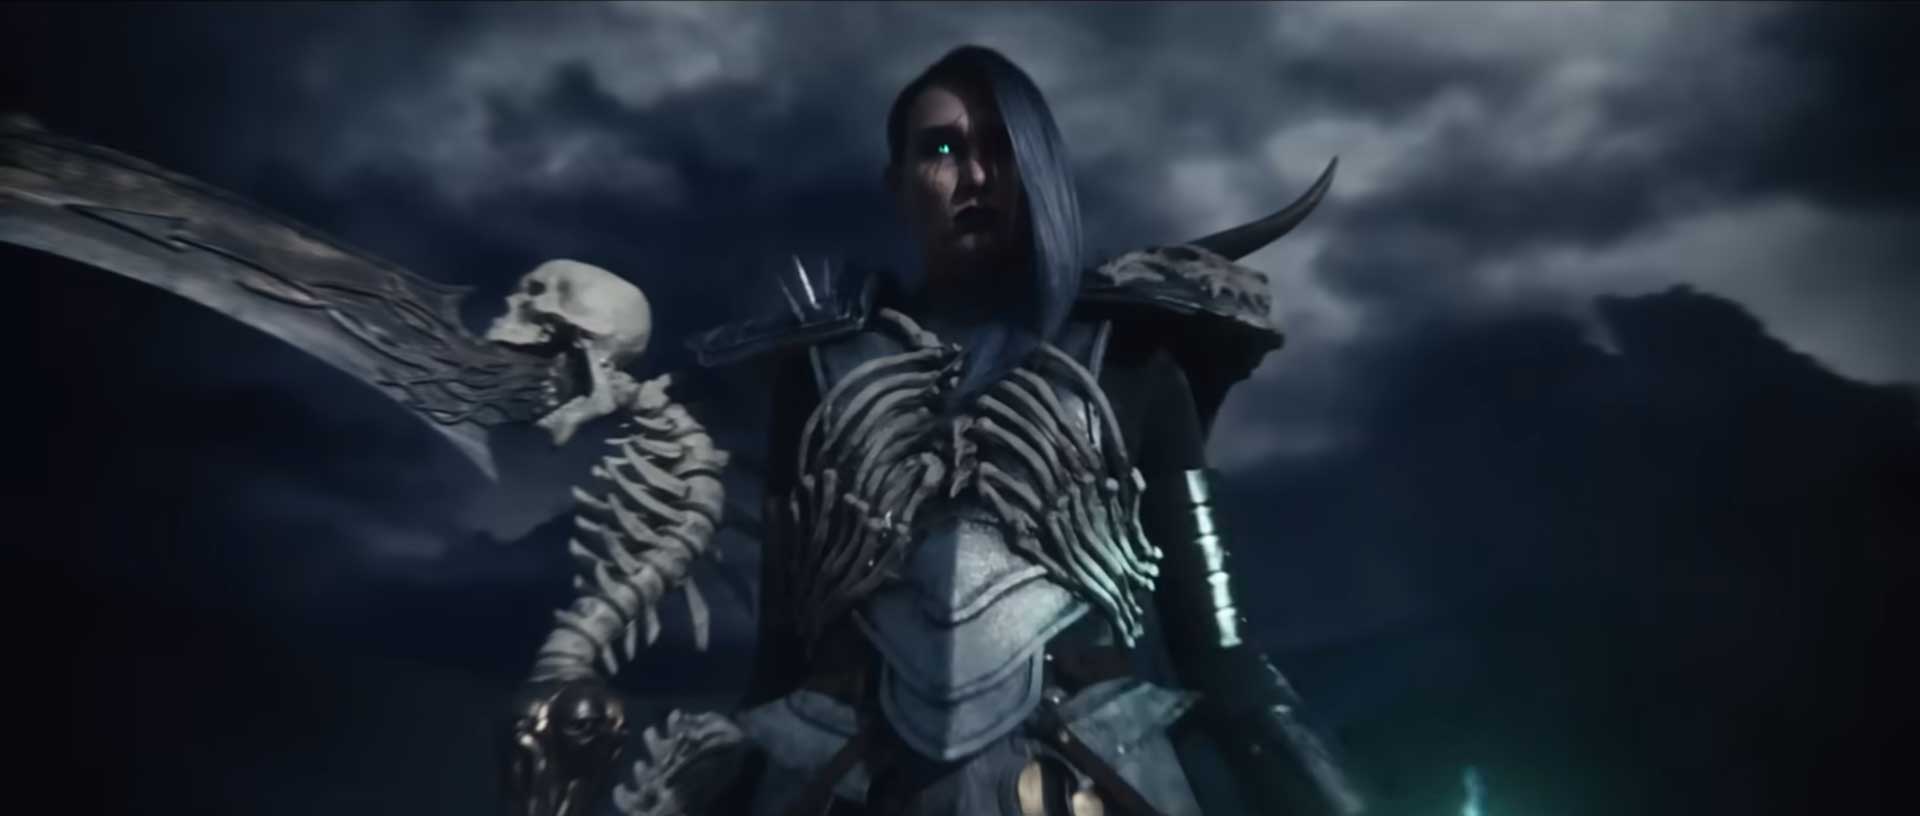 Diablo IV Deliver Us From Evil Launch Trailer The Mill | STASH MAGAZINE